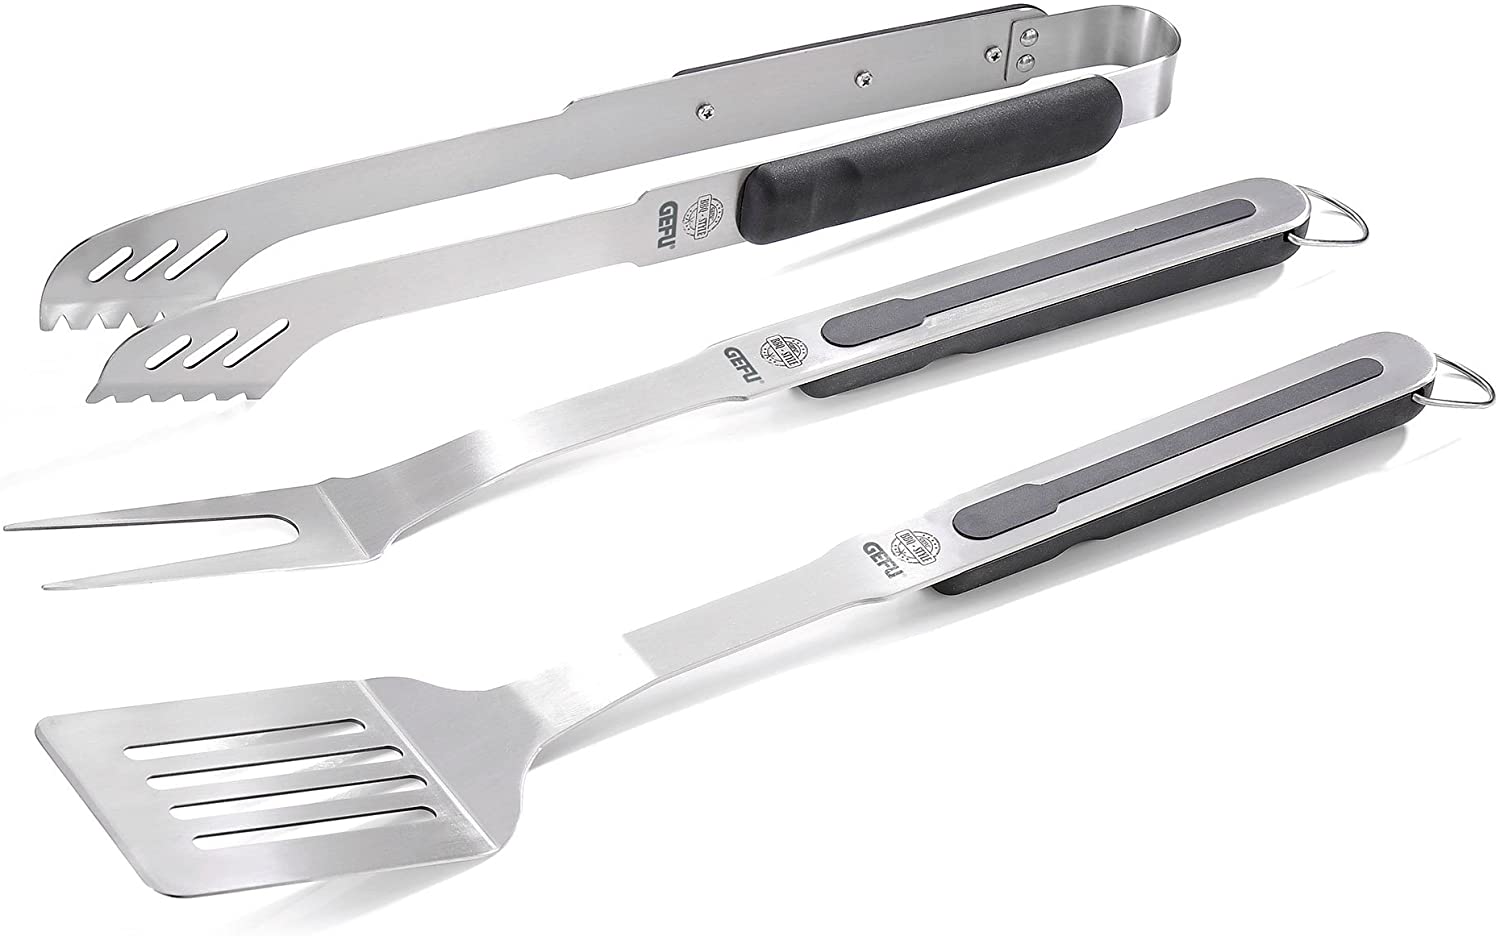 Gefu BBQ Barbecue Cutlery, 3-Part, Barbecue Tongs, Barbecue Fork, Turner, Stainless Steel, Plastic, 48 cm, 89159